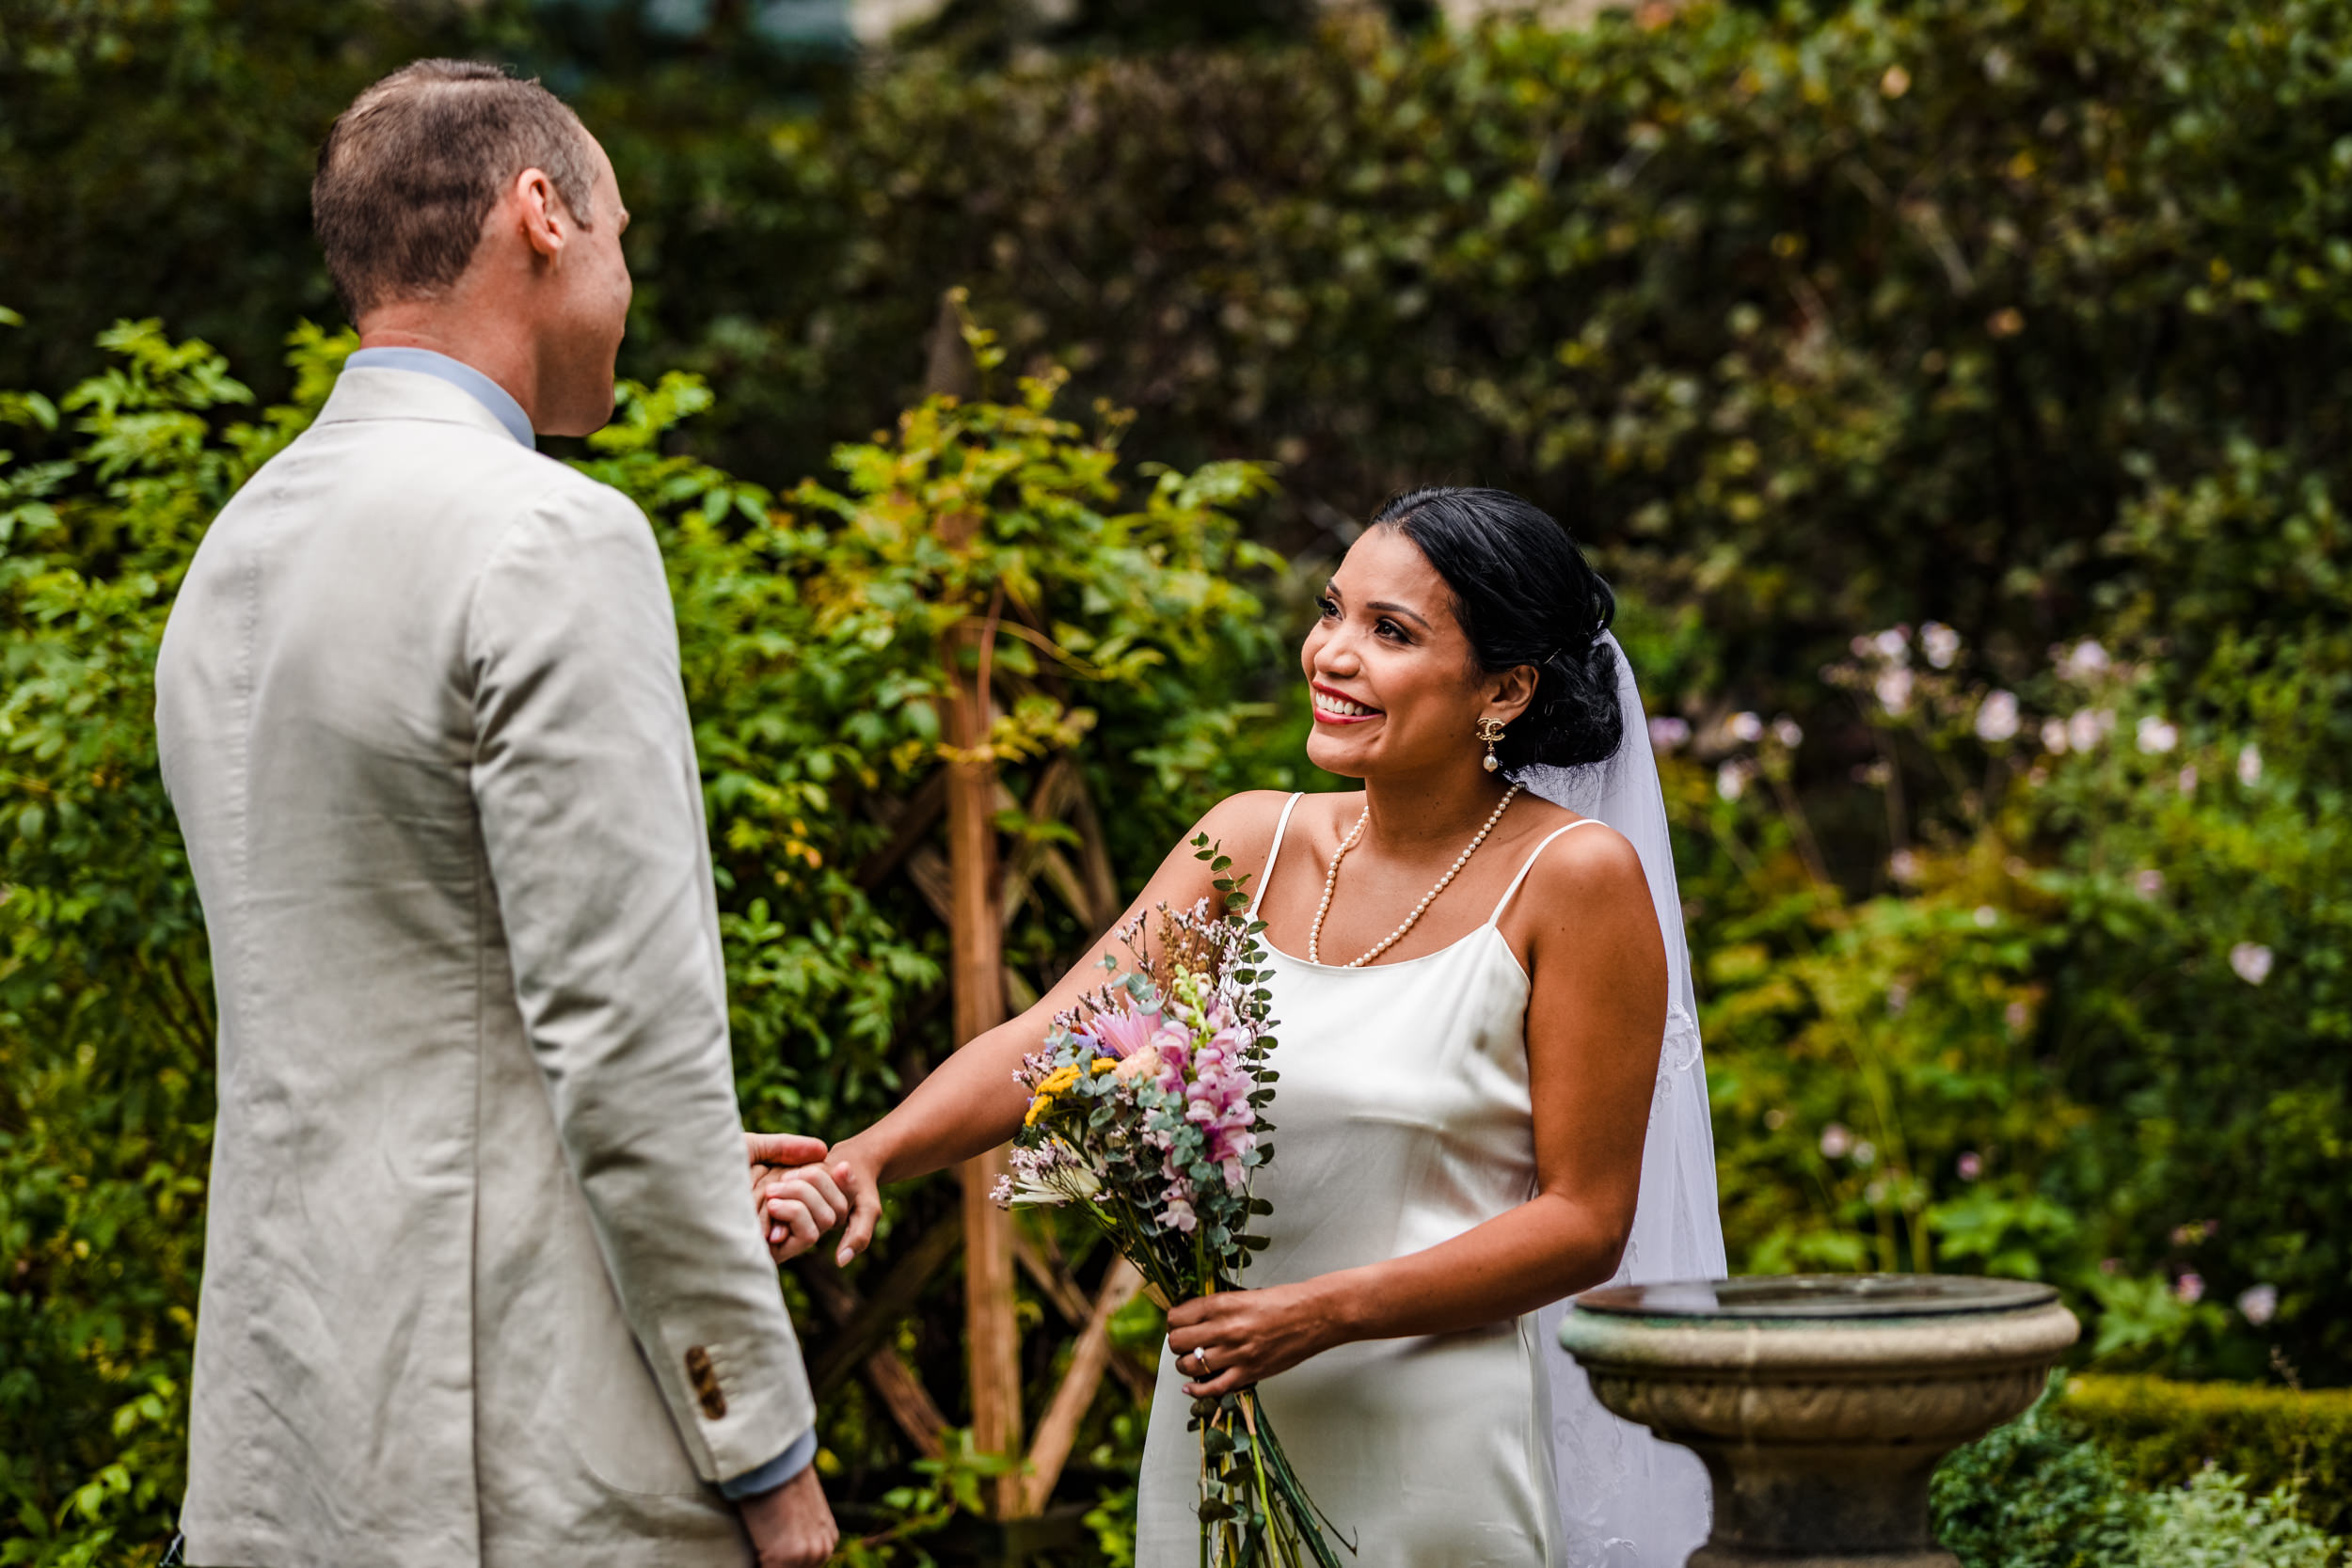 A bride smiles at her groom during a micro wedding ceremony at Shakespeare Garden in Evanston.